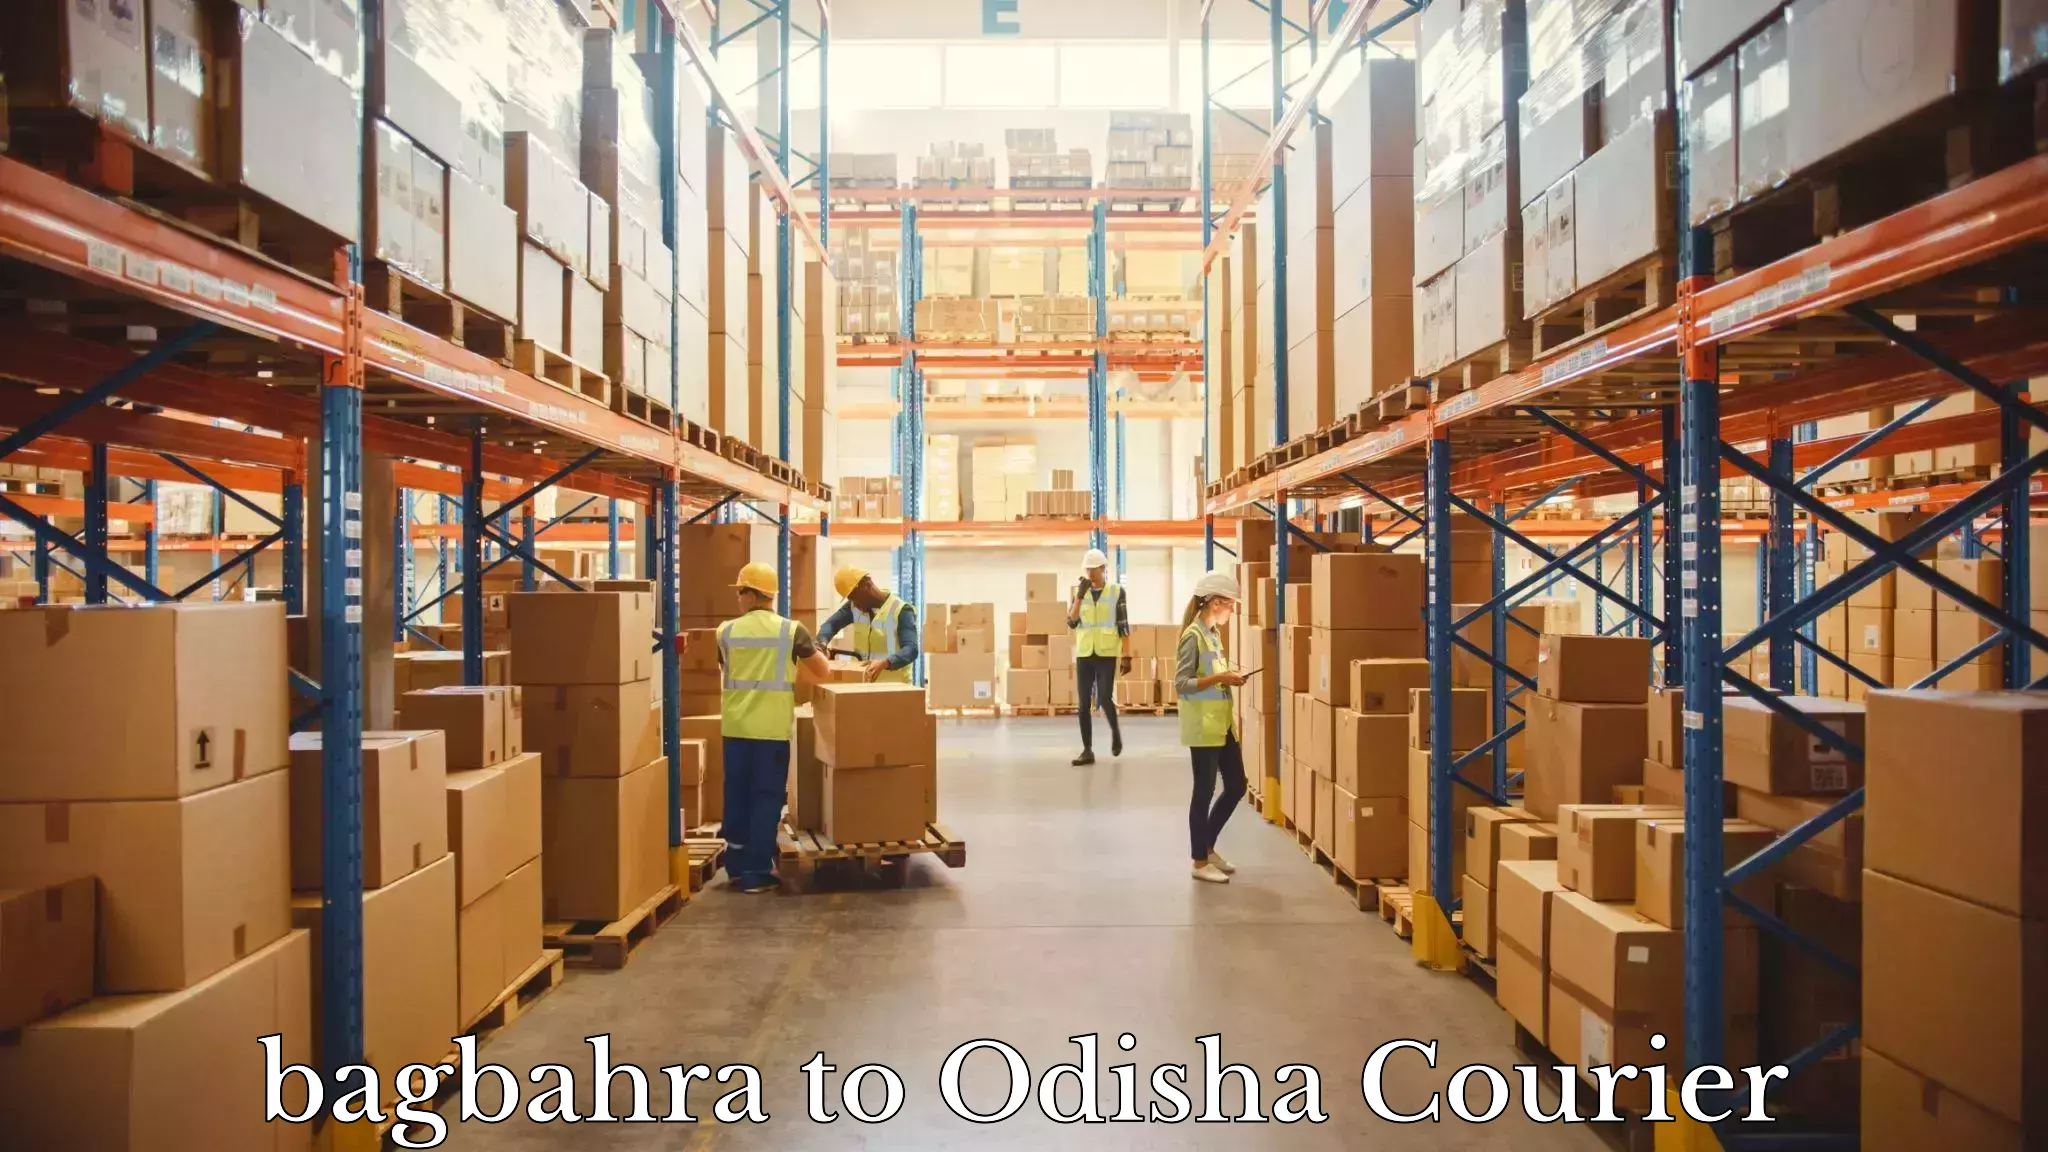 Cargo delivery service bagbahra to Odisha